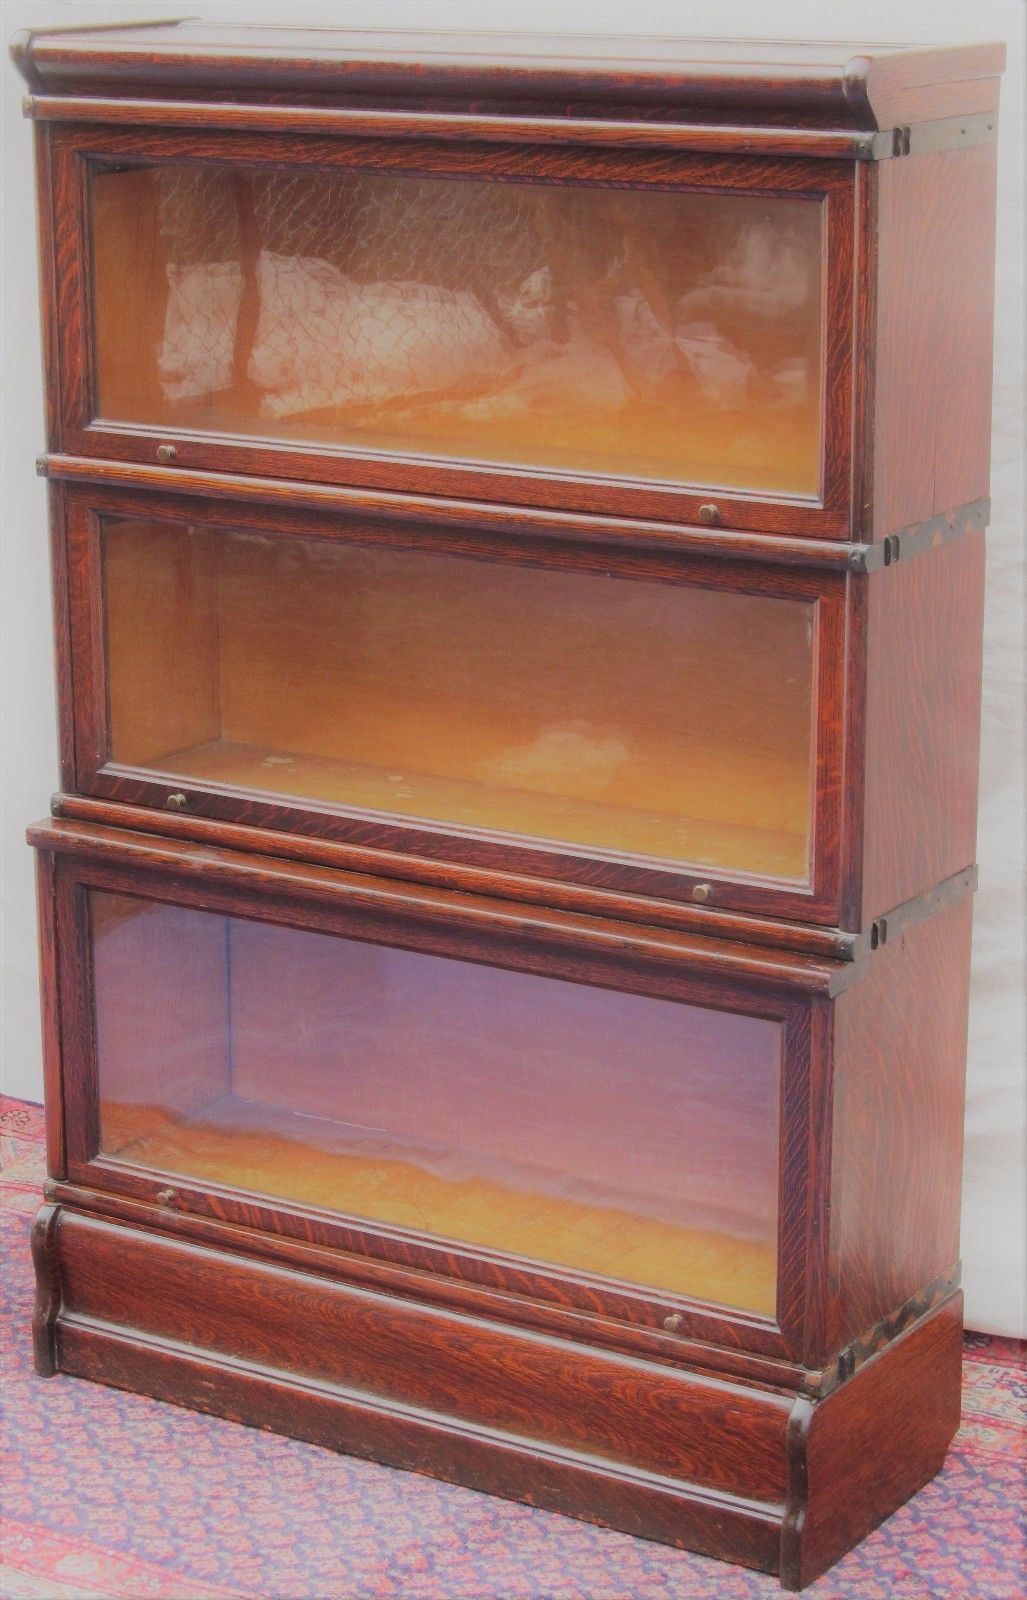 MACEY OAK BARRISTER BOOKCASE WITH EXTRA LARGE D 12 1/4